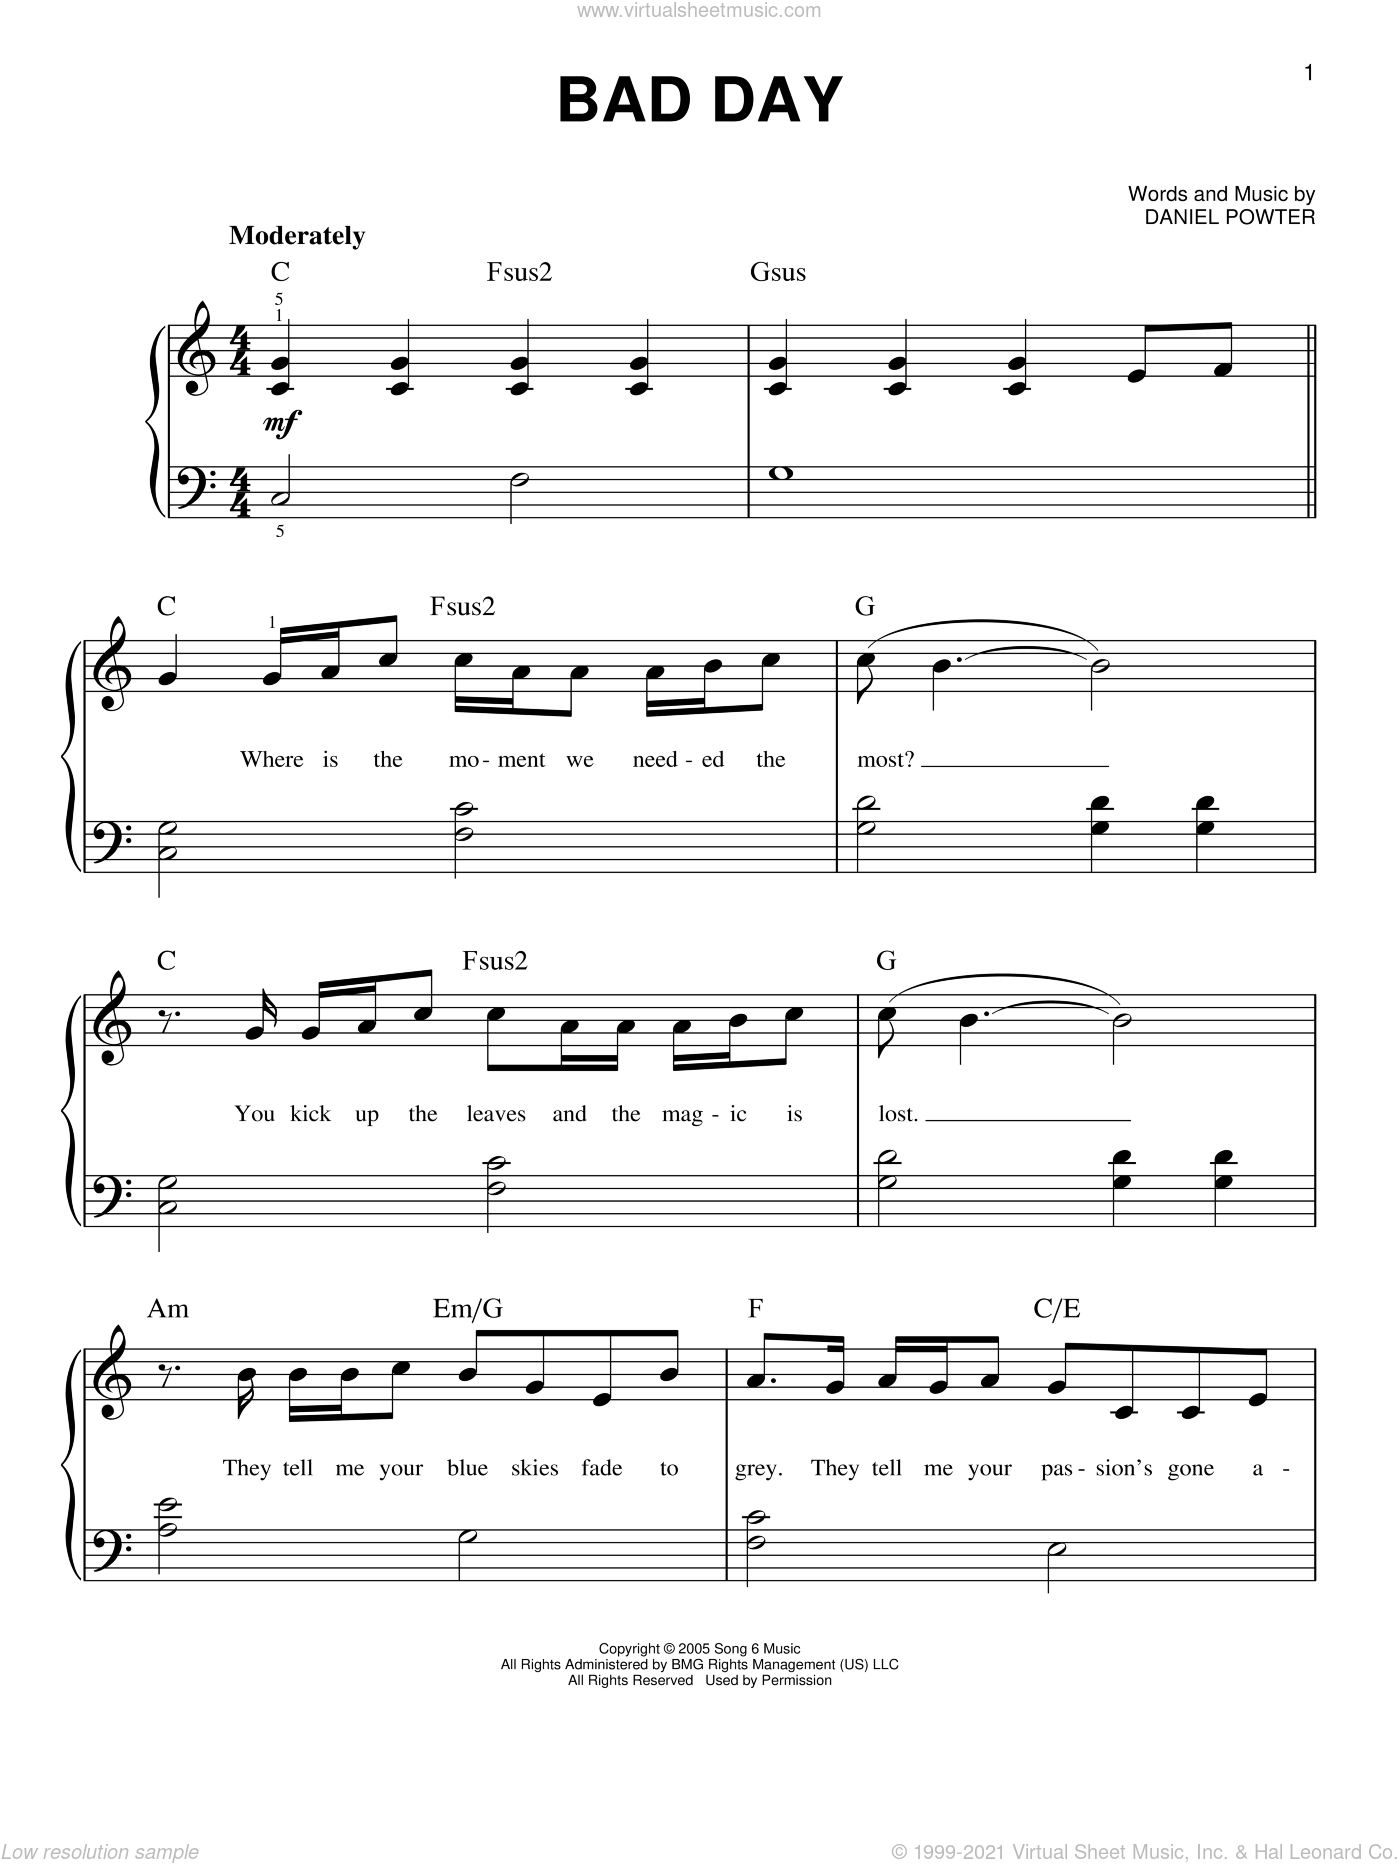 Bad Day easy Sheet Music For Piano Solo PDF interactive - Bad Day Piano Sheet Music Free Printable